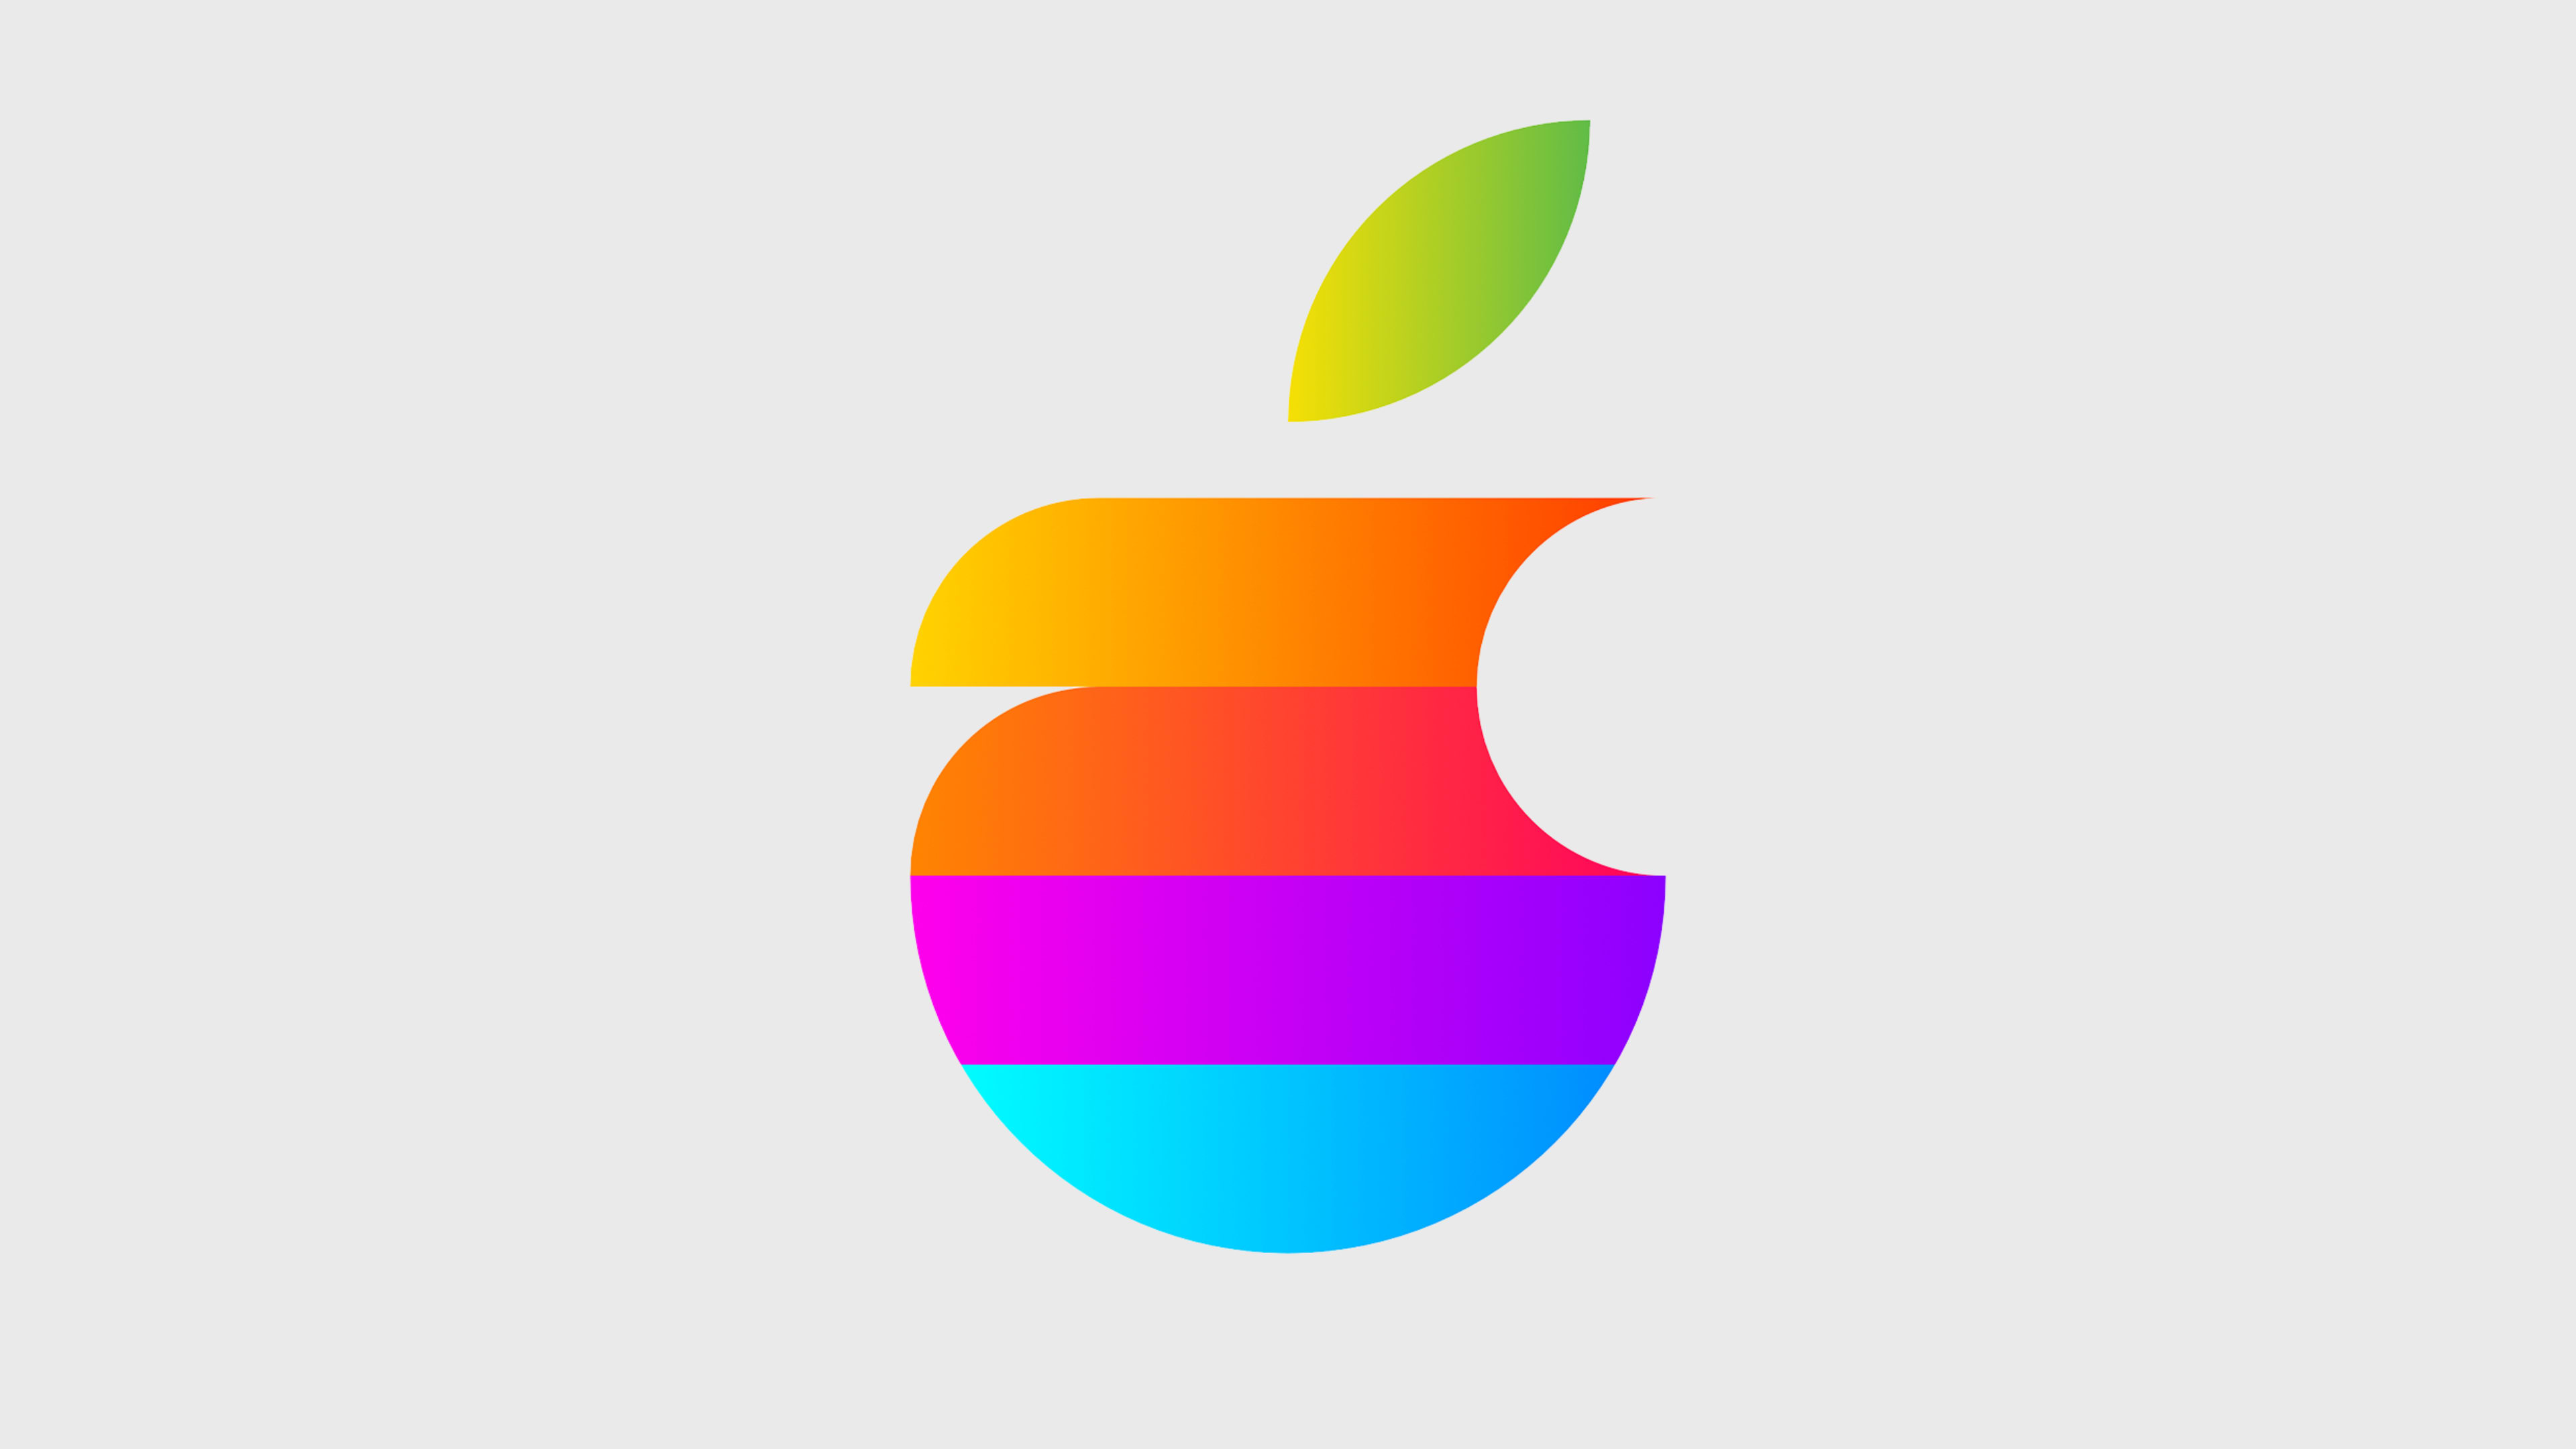 Designers reimagine the iconic logos of Apple, Twitter, and more